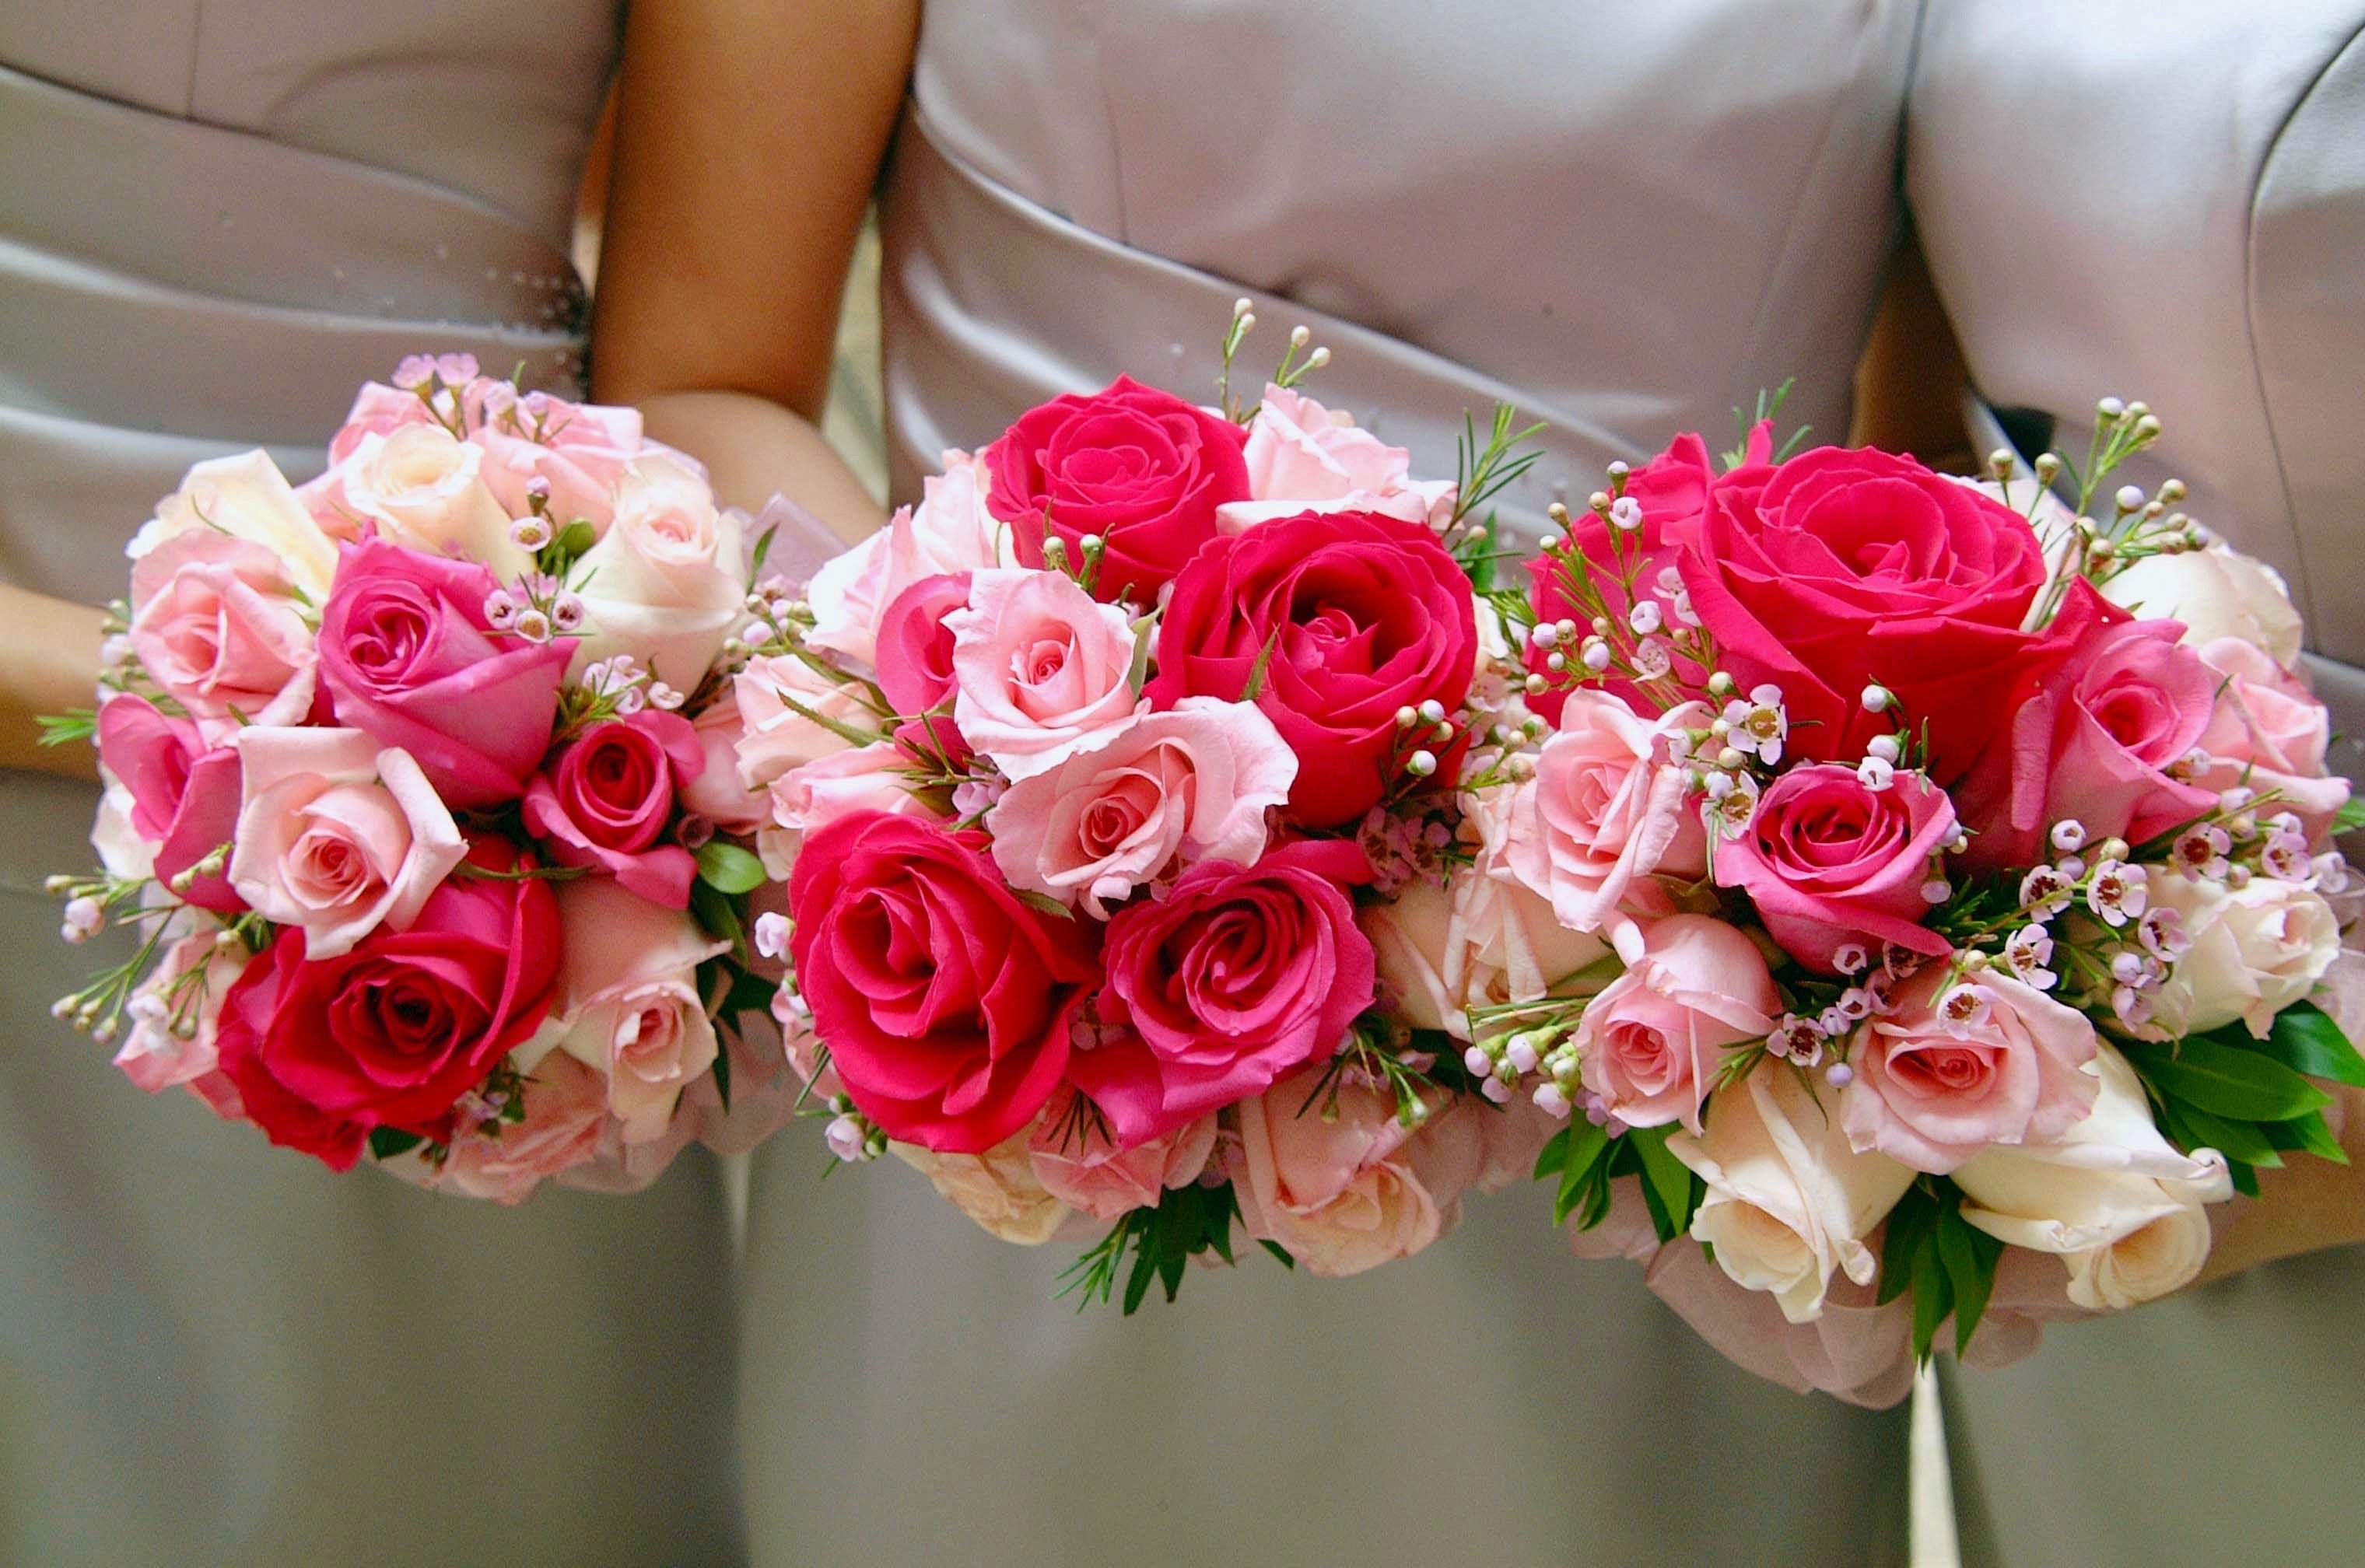 Bridesmaids holding their bouquets.  | Source: Pexels